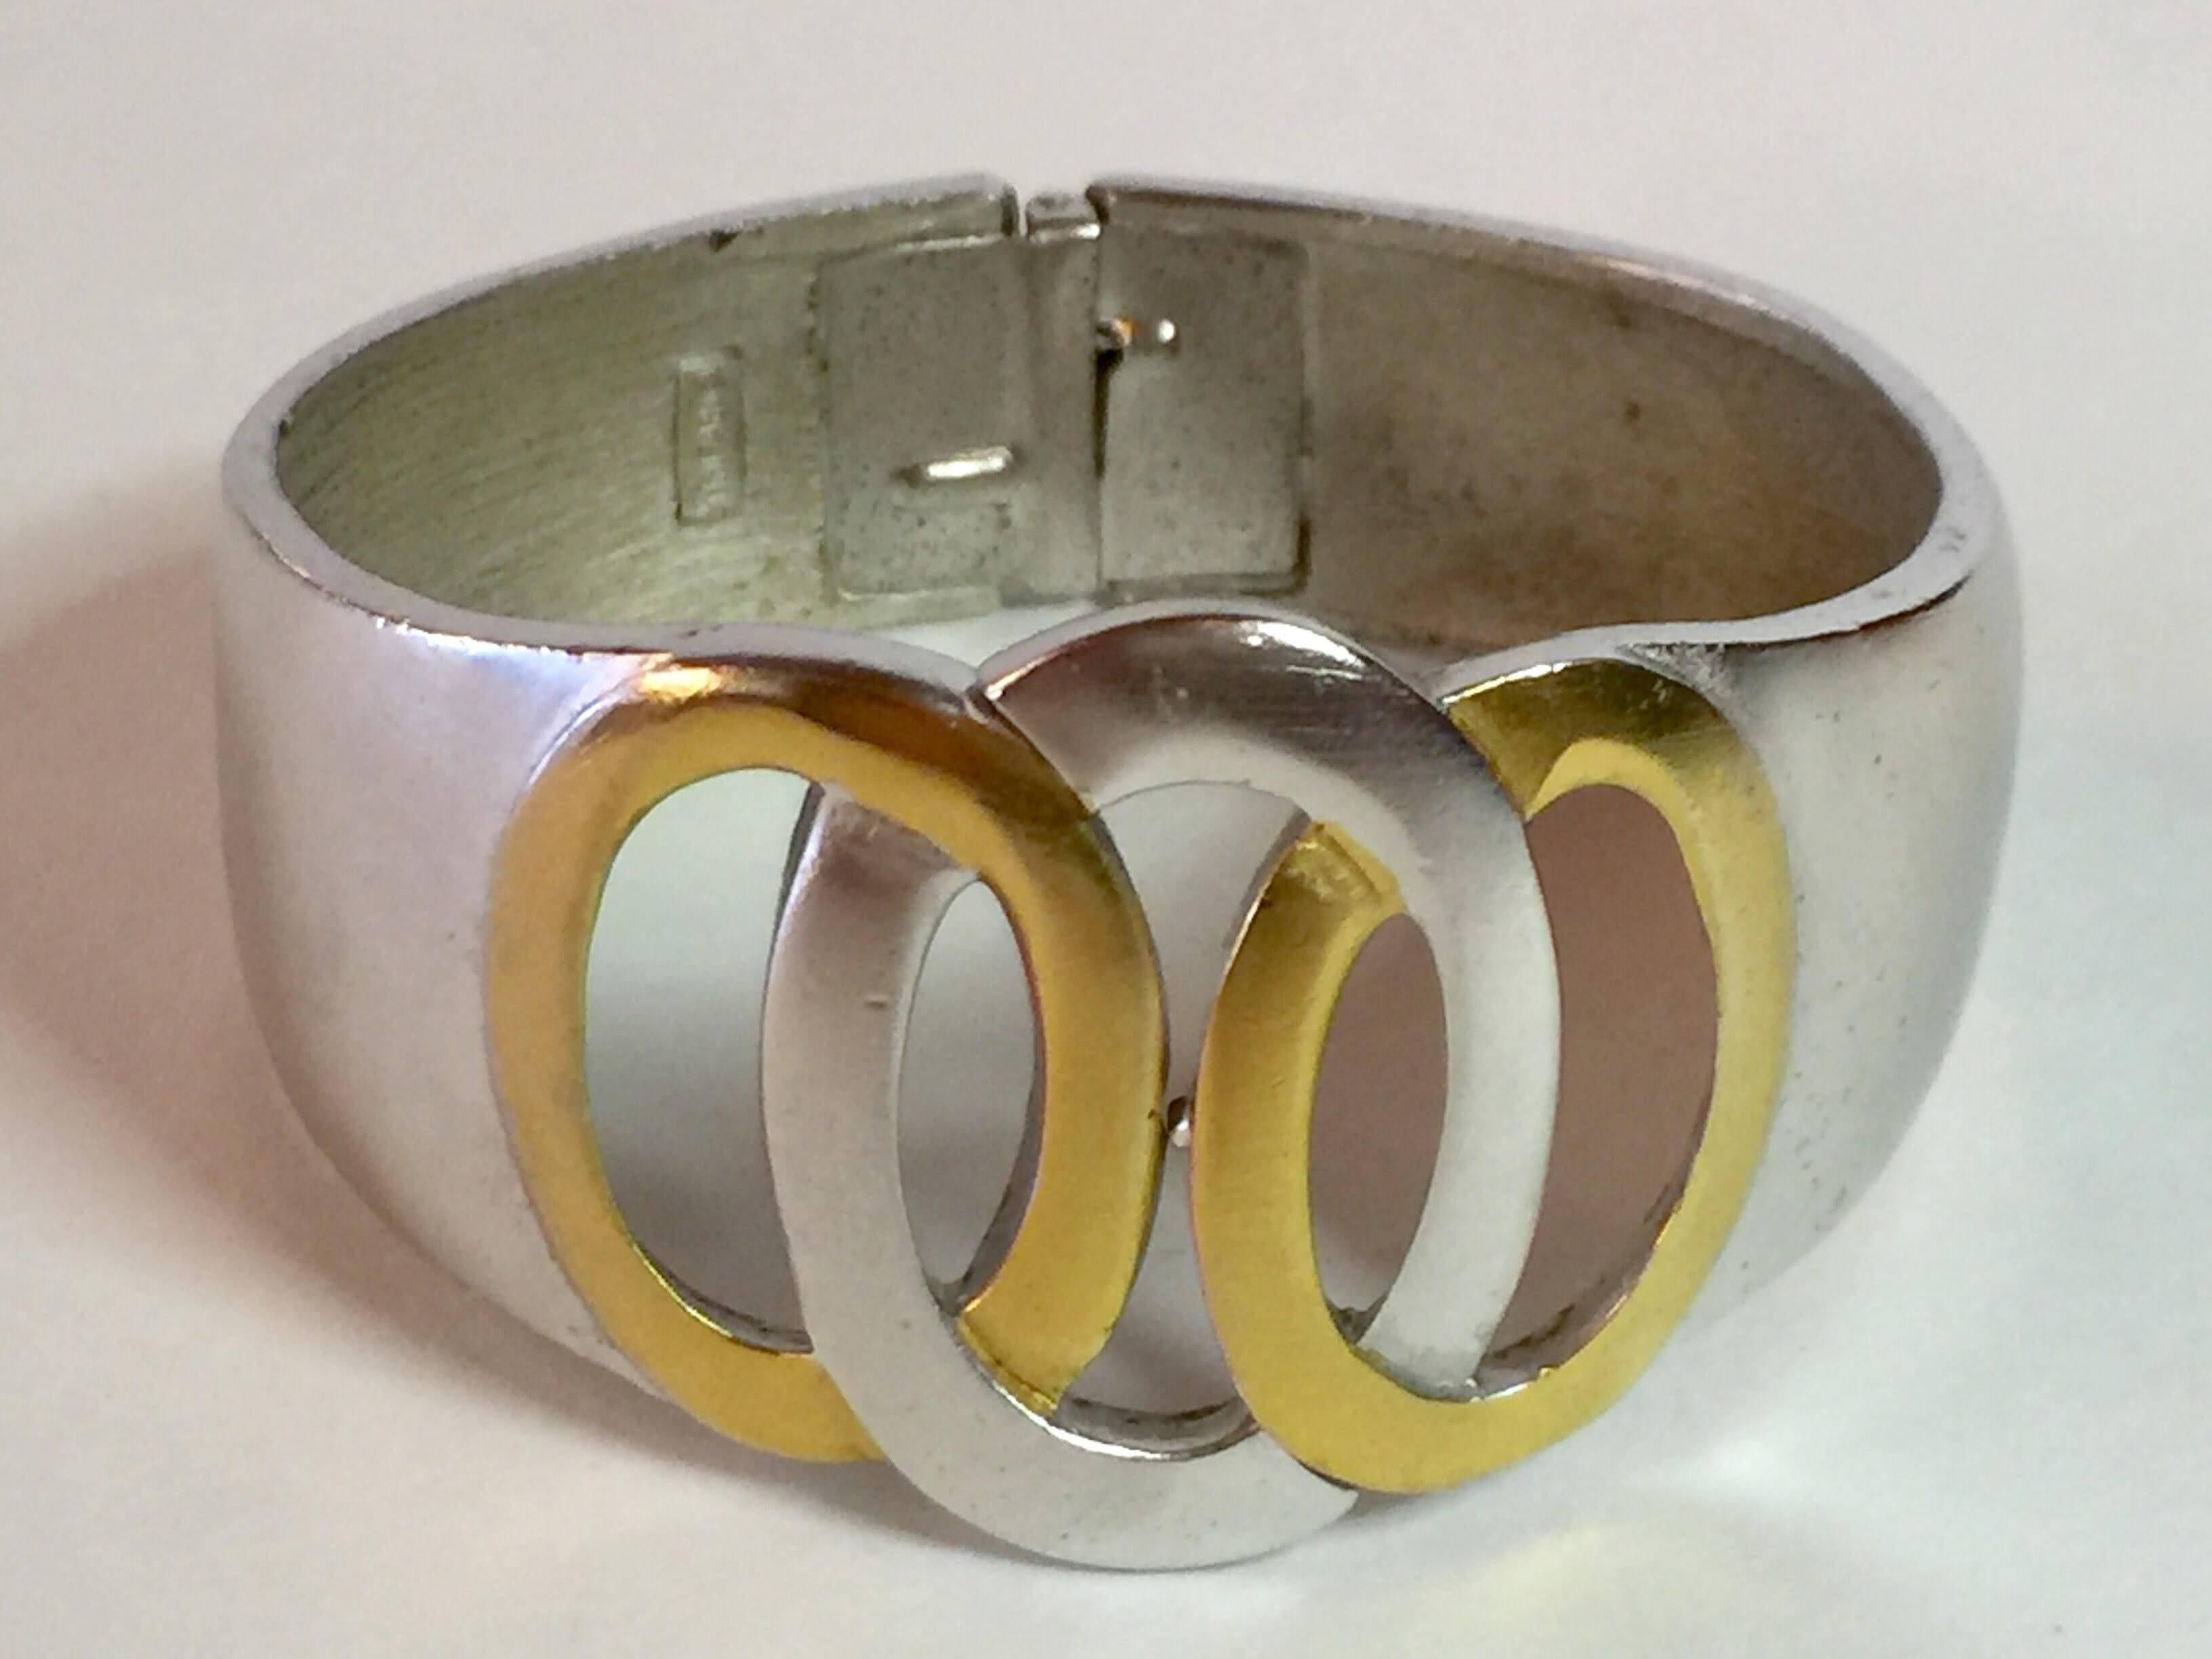 Kunio Matsumoto 1960s TRIFARI Mixed Metals Silver and Goldtone Hinged Bracelet In Excellent Condition For Sale In Palm Springs, CA